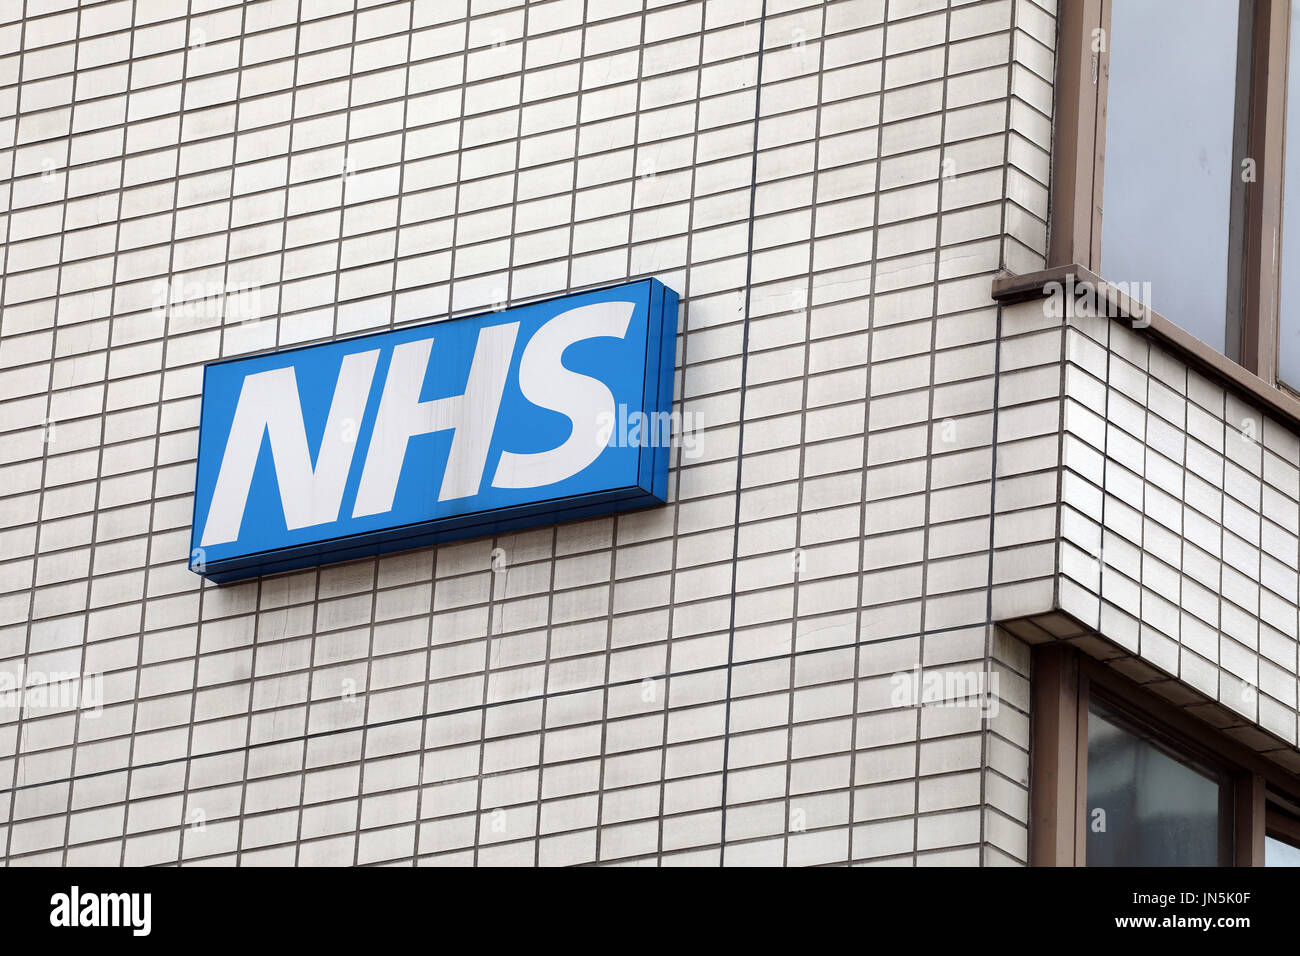 NHS sign on side of St Thomas's Hospital in London.     Pic by Gavin Rodgers/Pixel 8000 Ltd Stock Photo